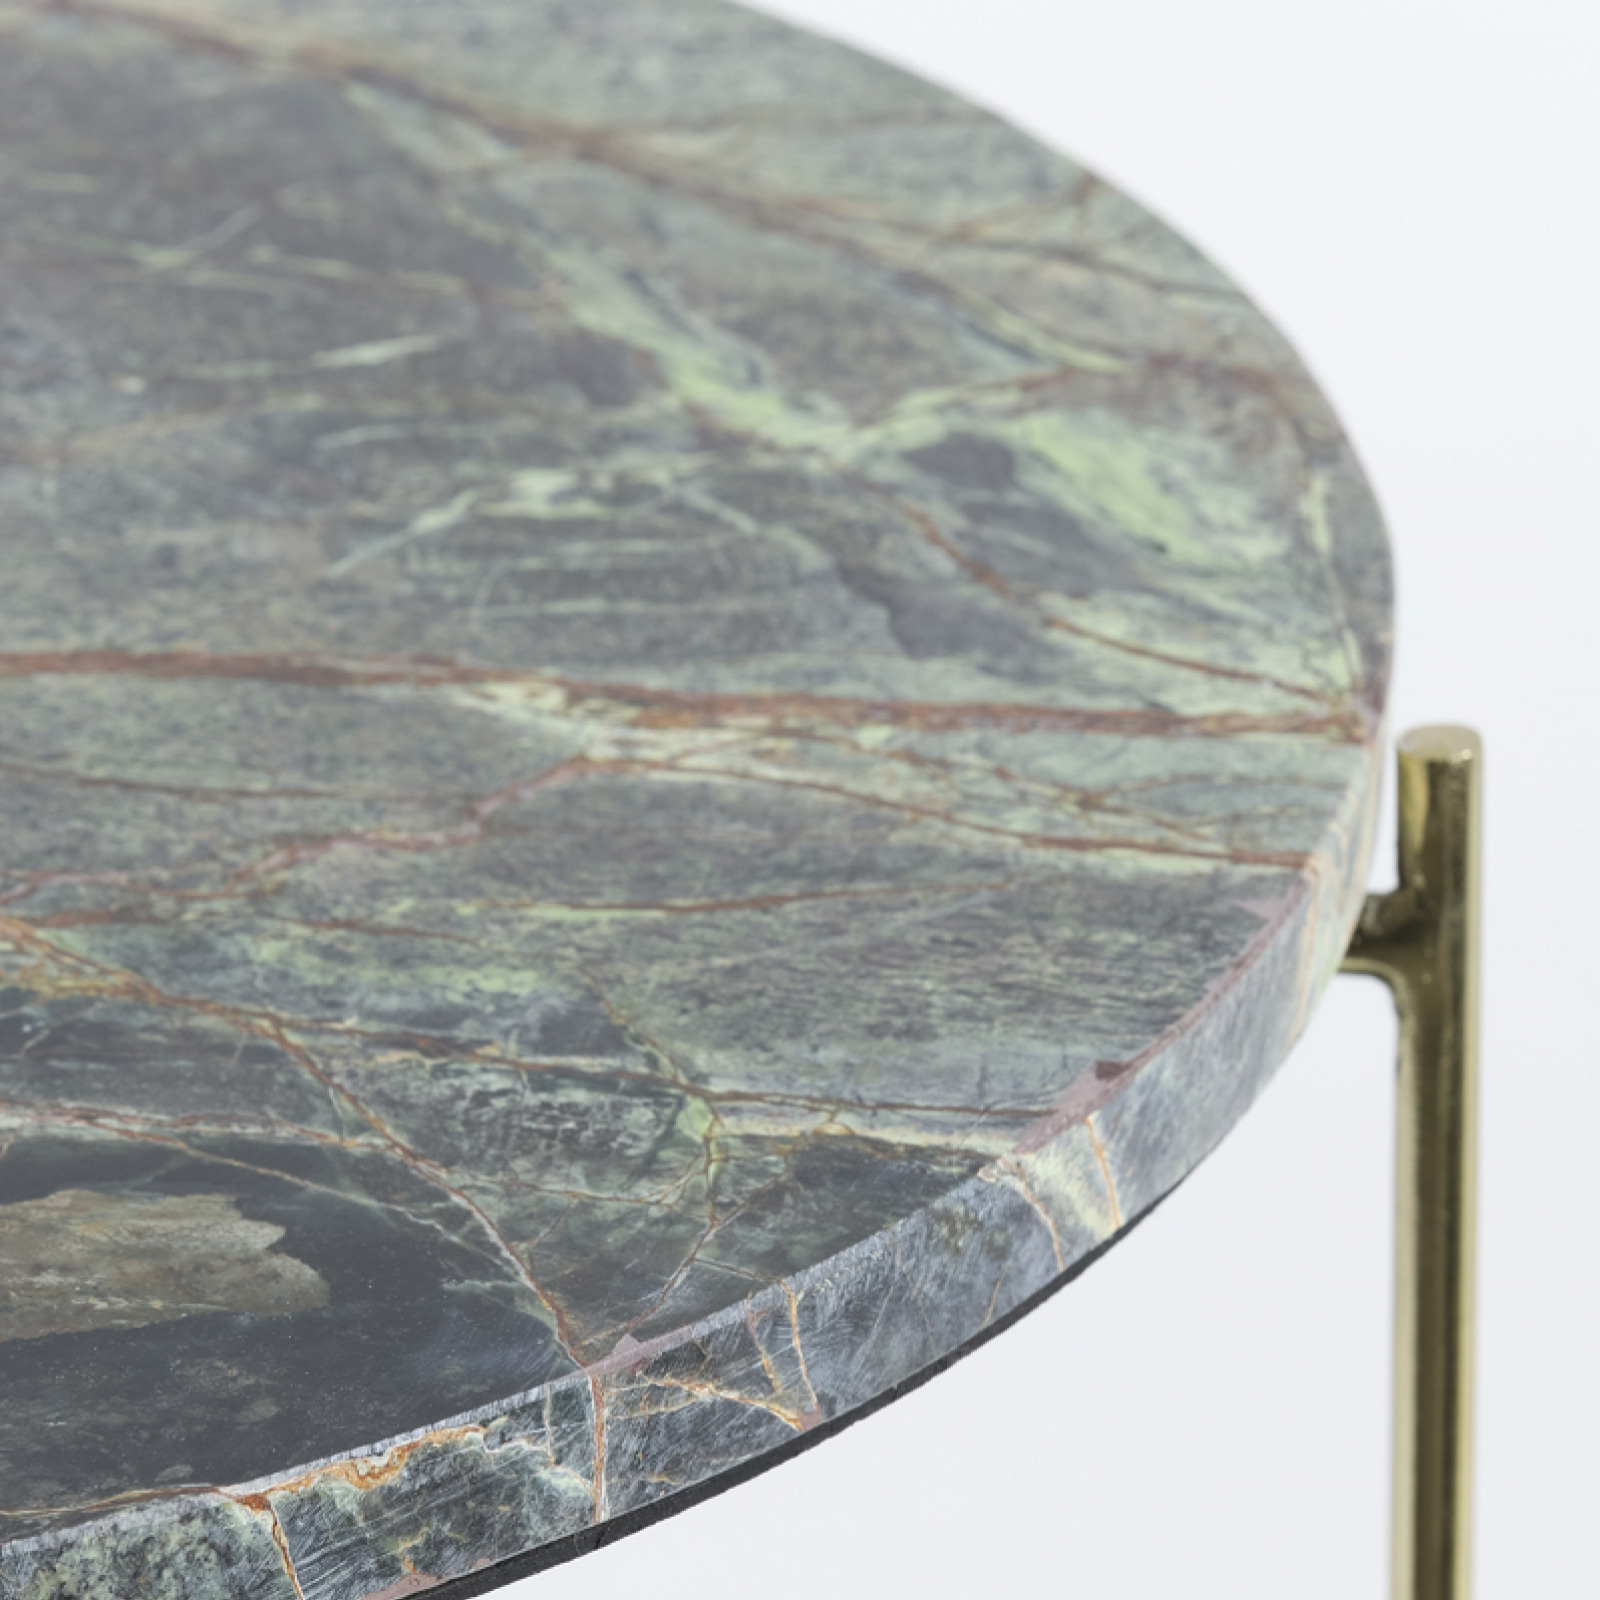 Besut marble side table